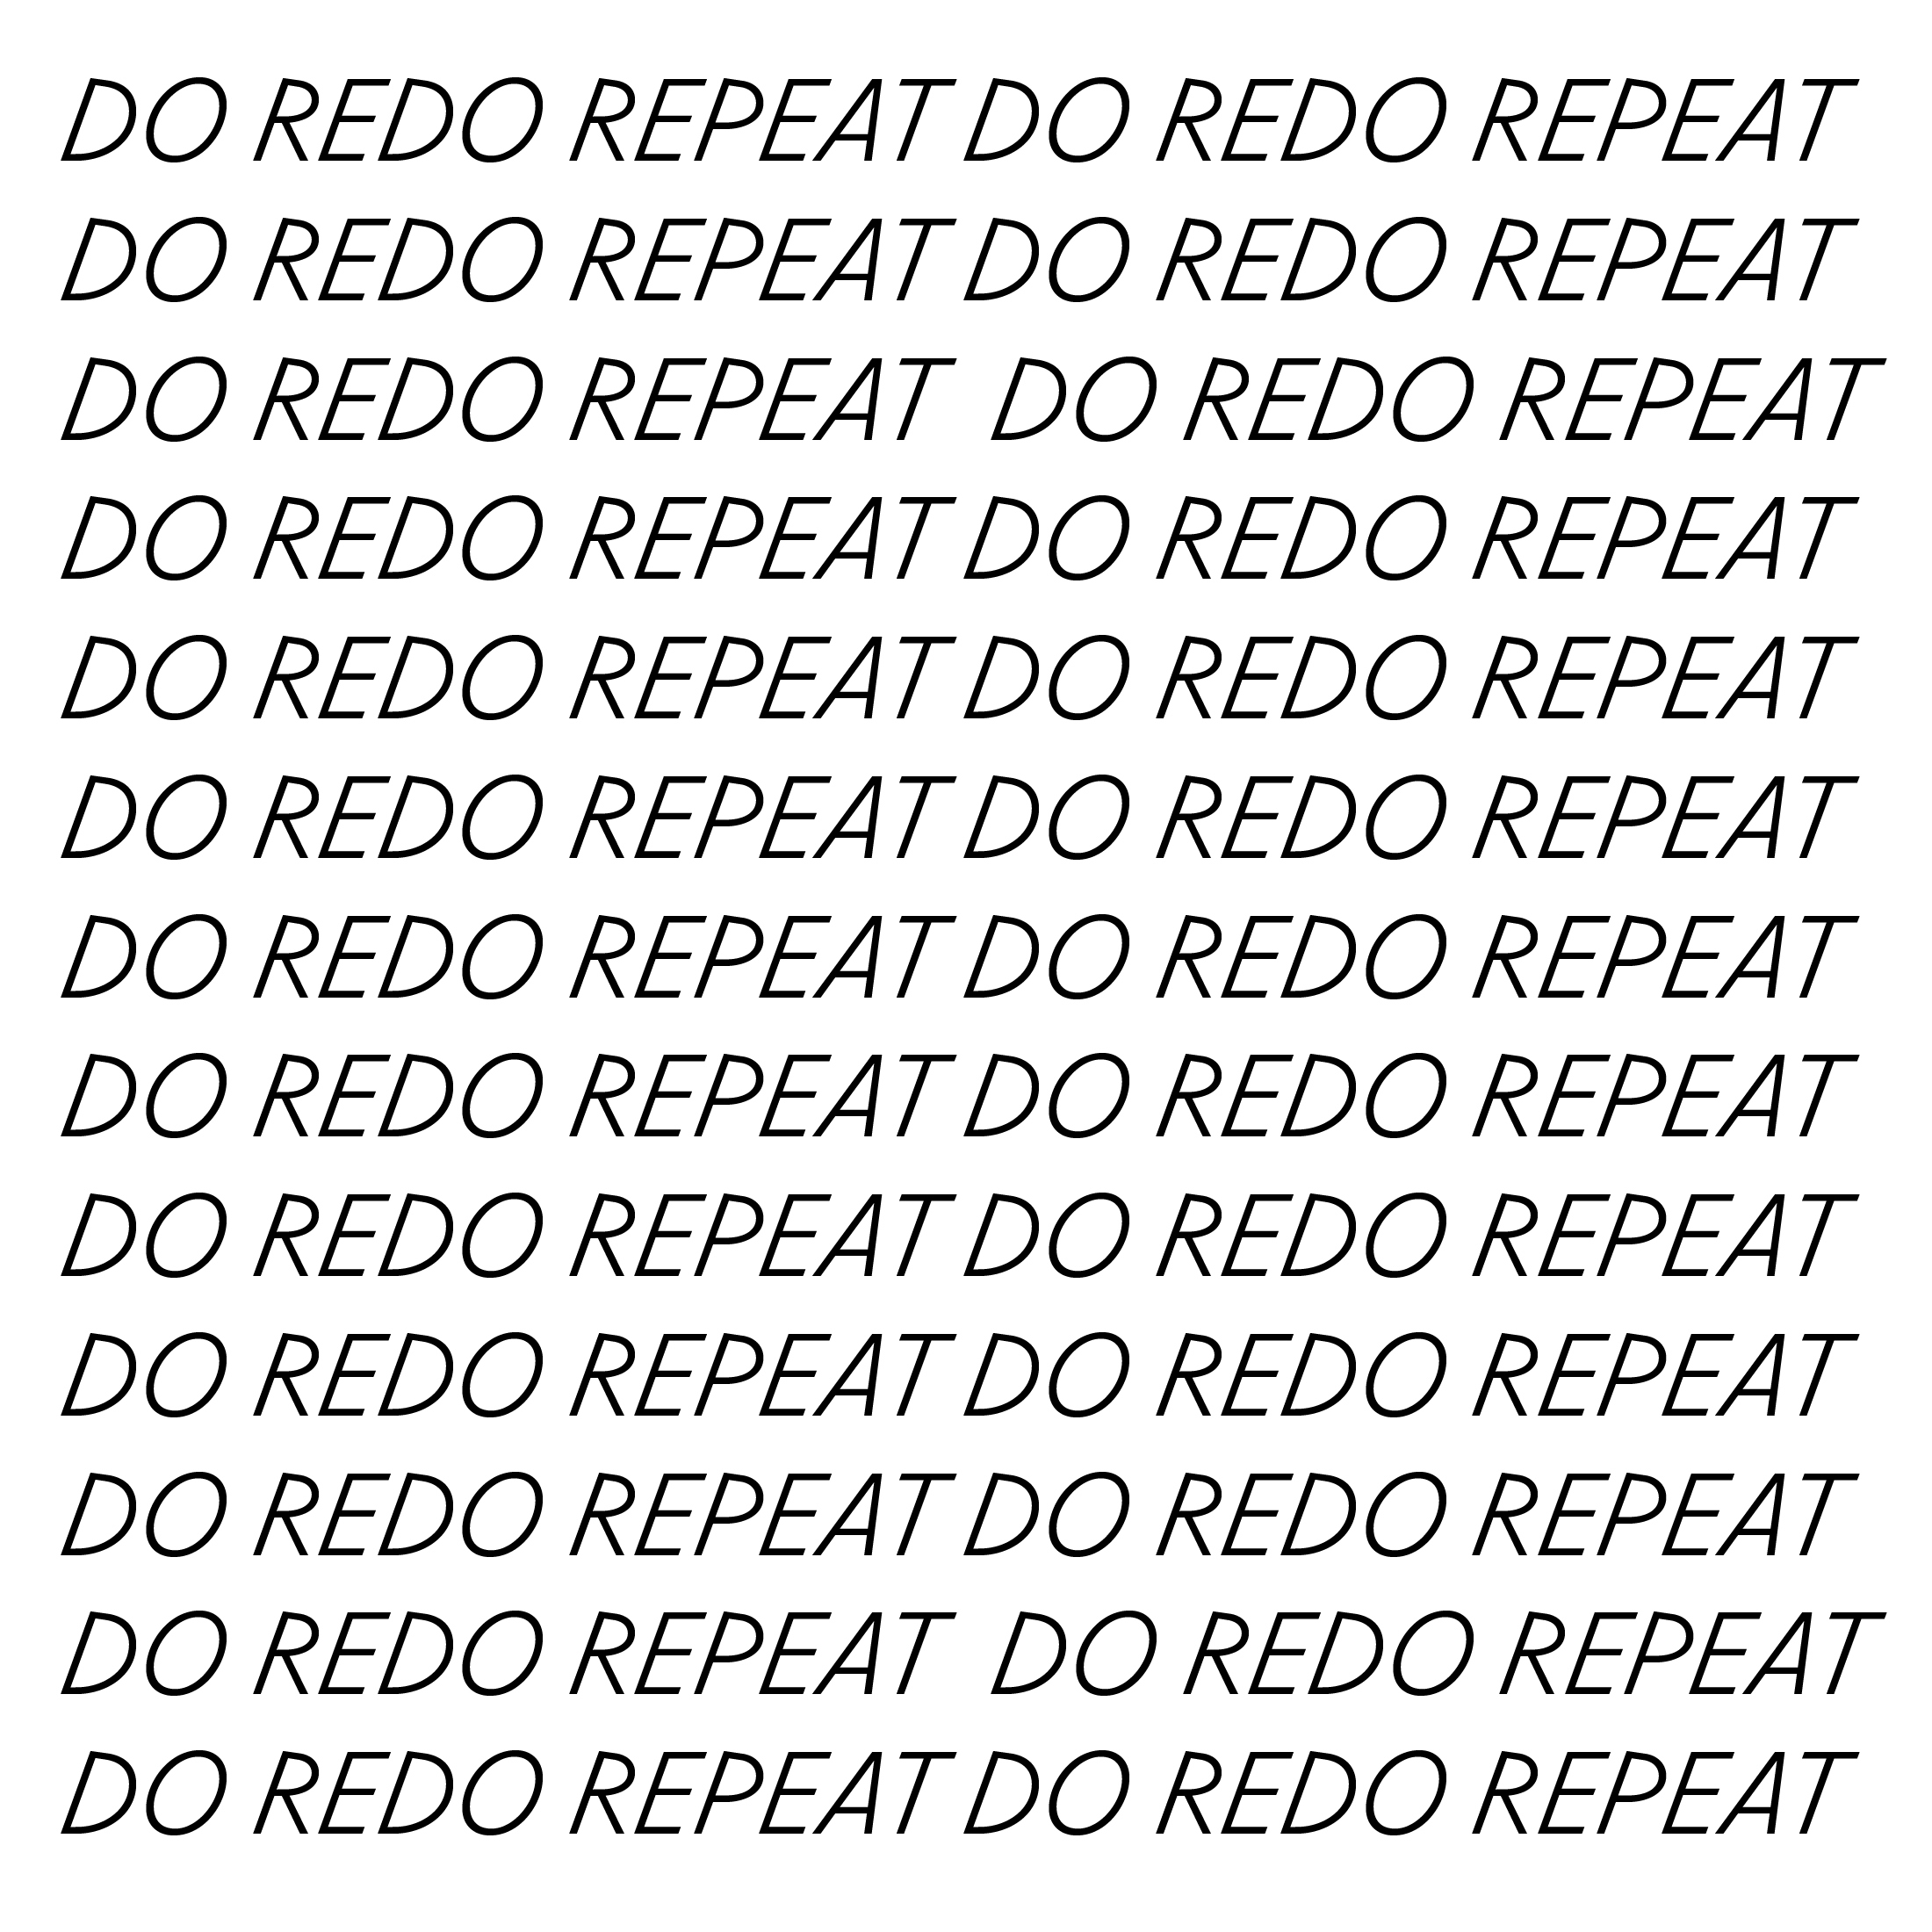 Do Redo Repeat by 